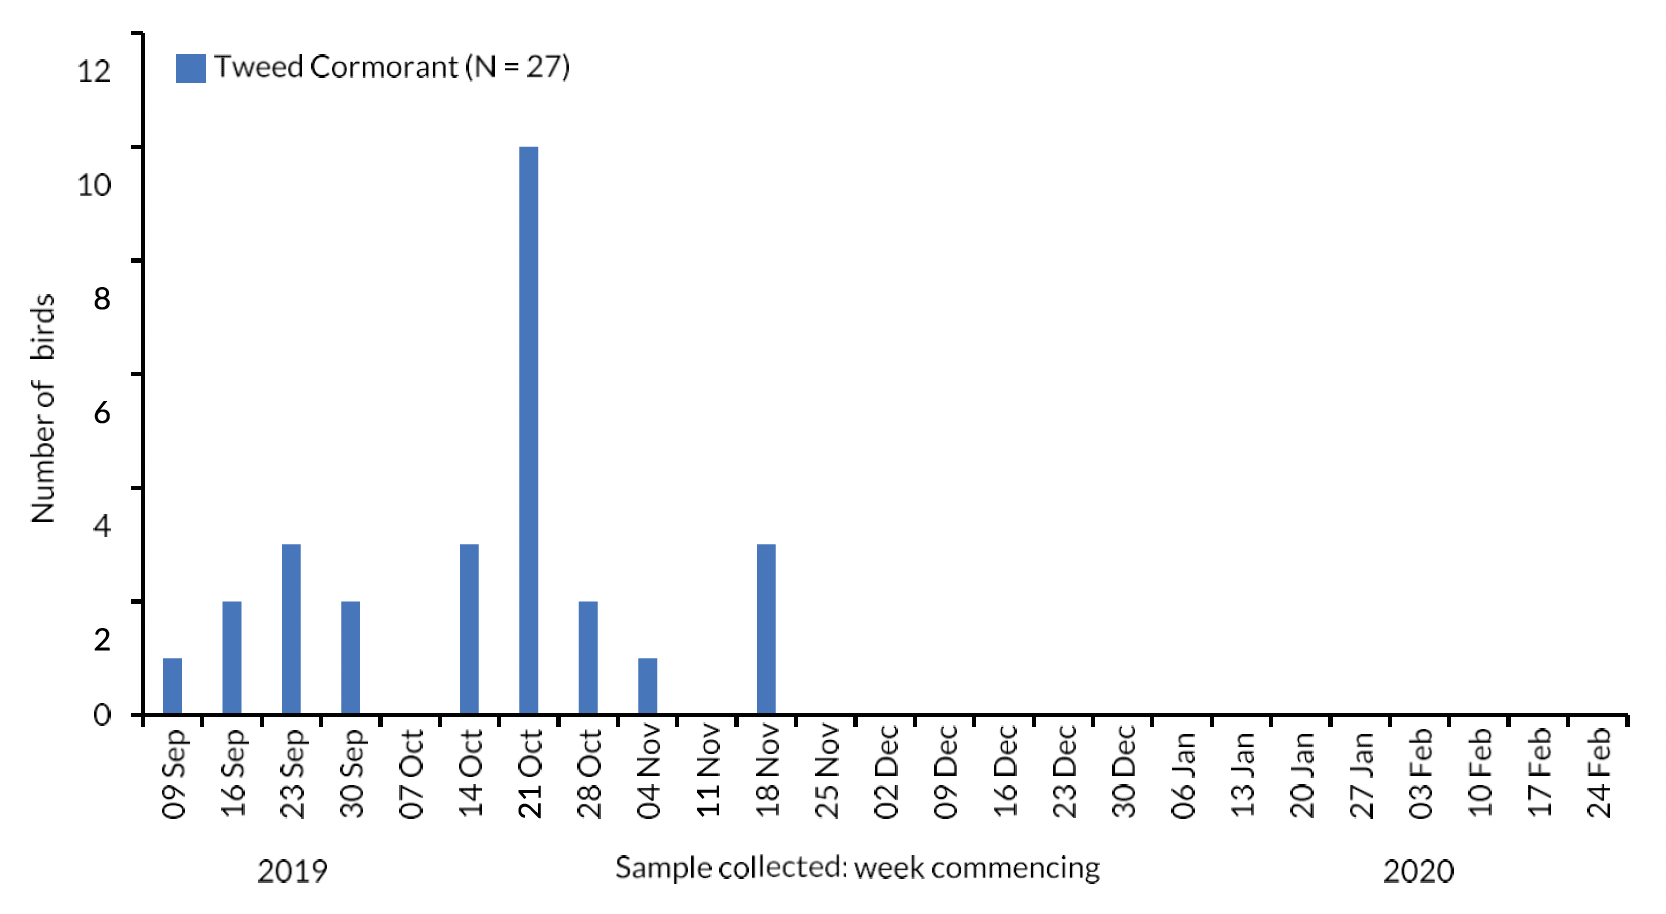 Bar chart of the number of River Tweed Cormorants collected each week during the autumn- winter period 2019/20.